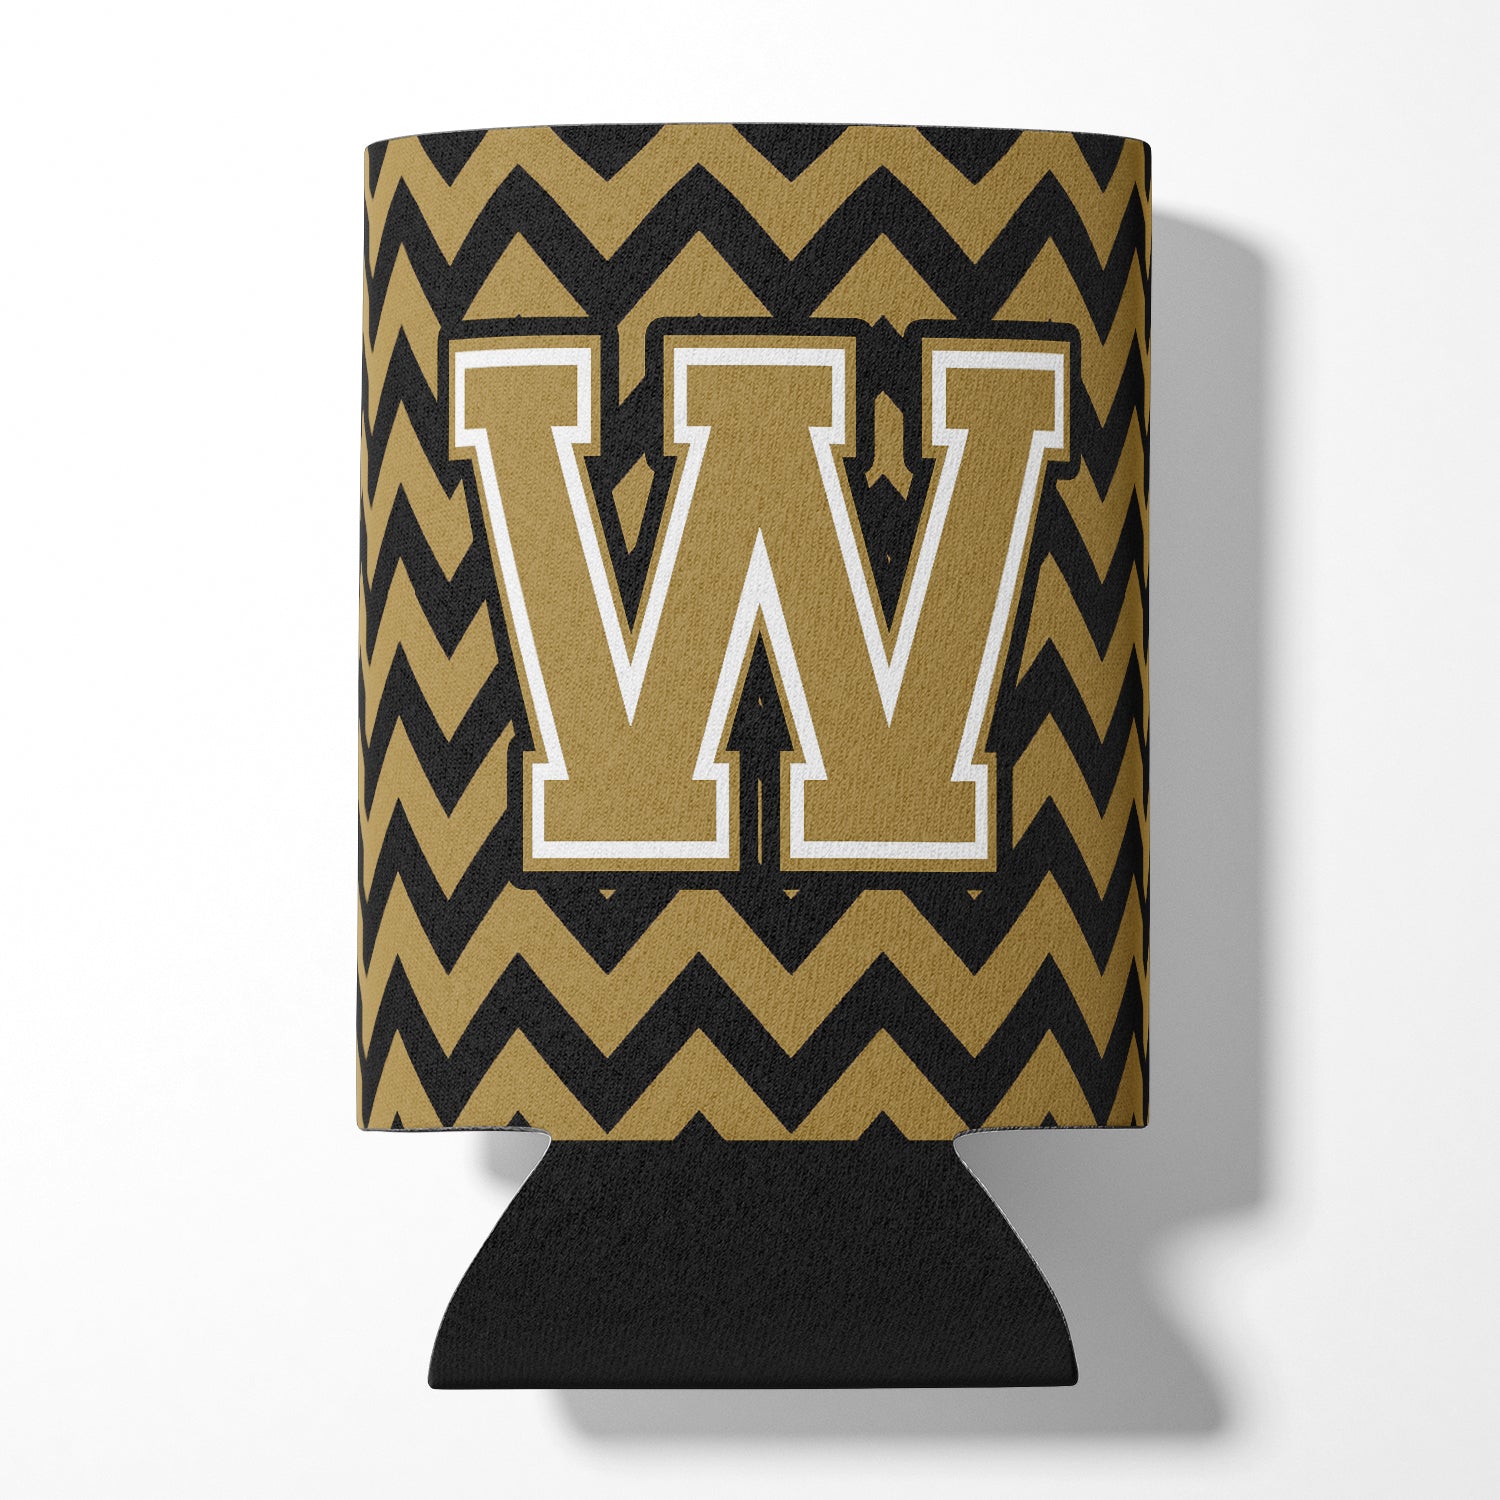 Letter W Chevron Black and Gold  Can or Bottle Hugger CJ1050-WCC